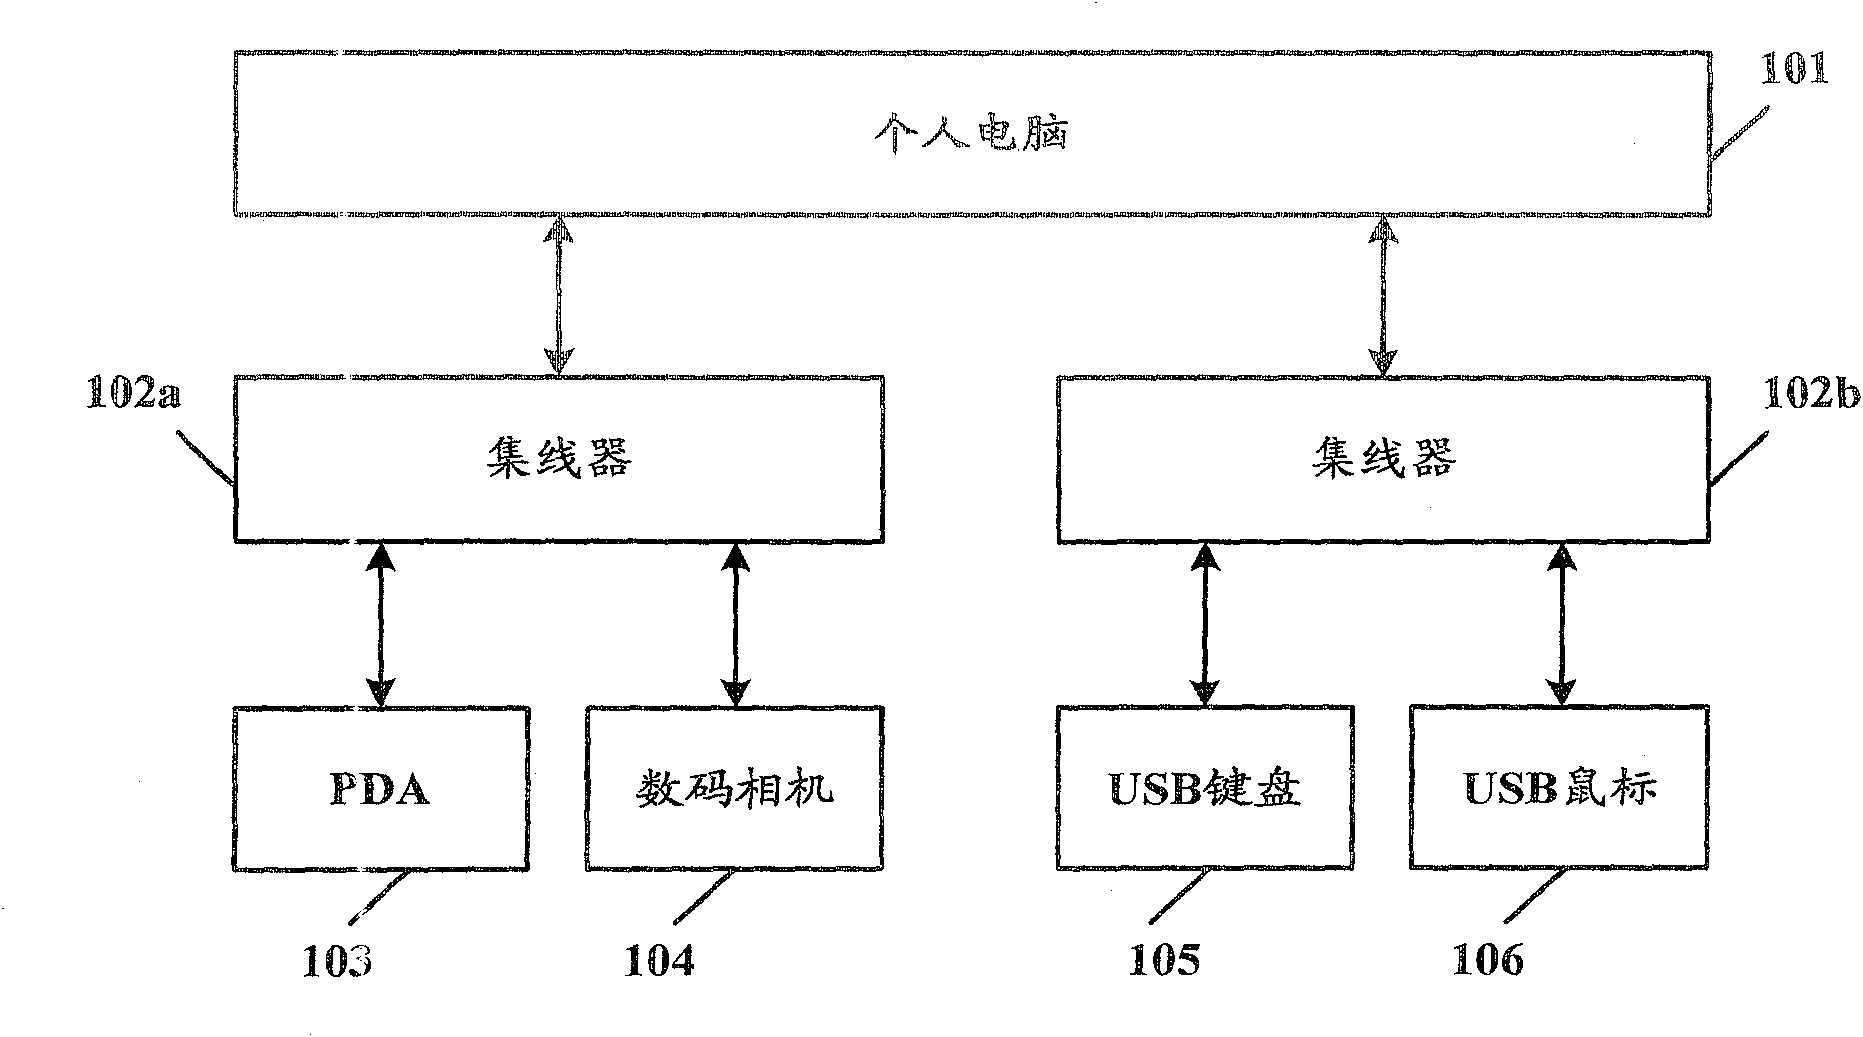 Device for automatically detecting universal serial bus main unit or peripherals